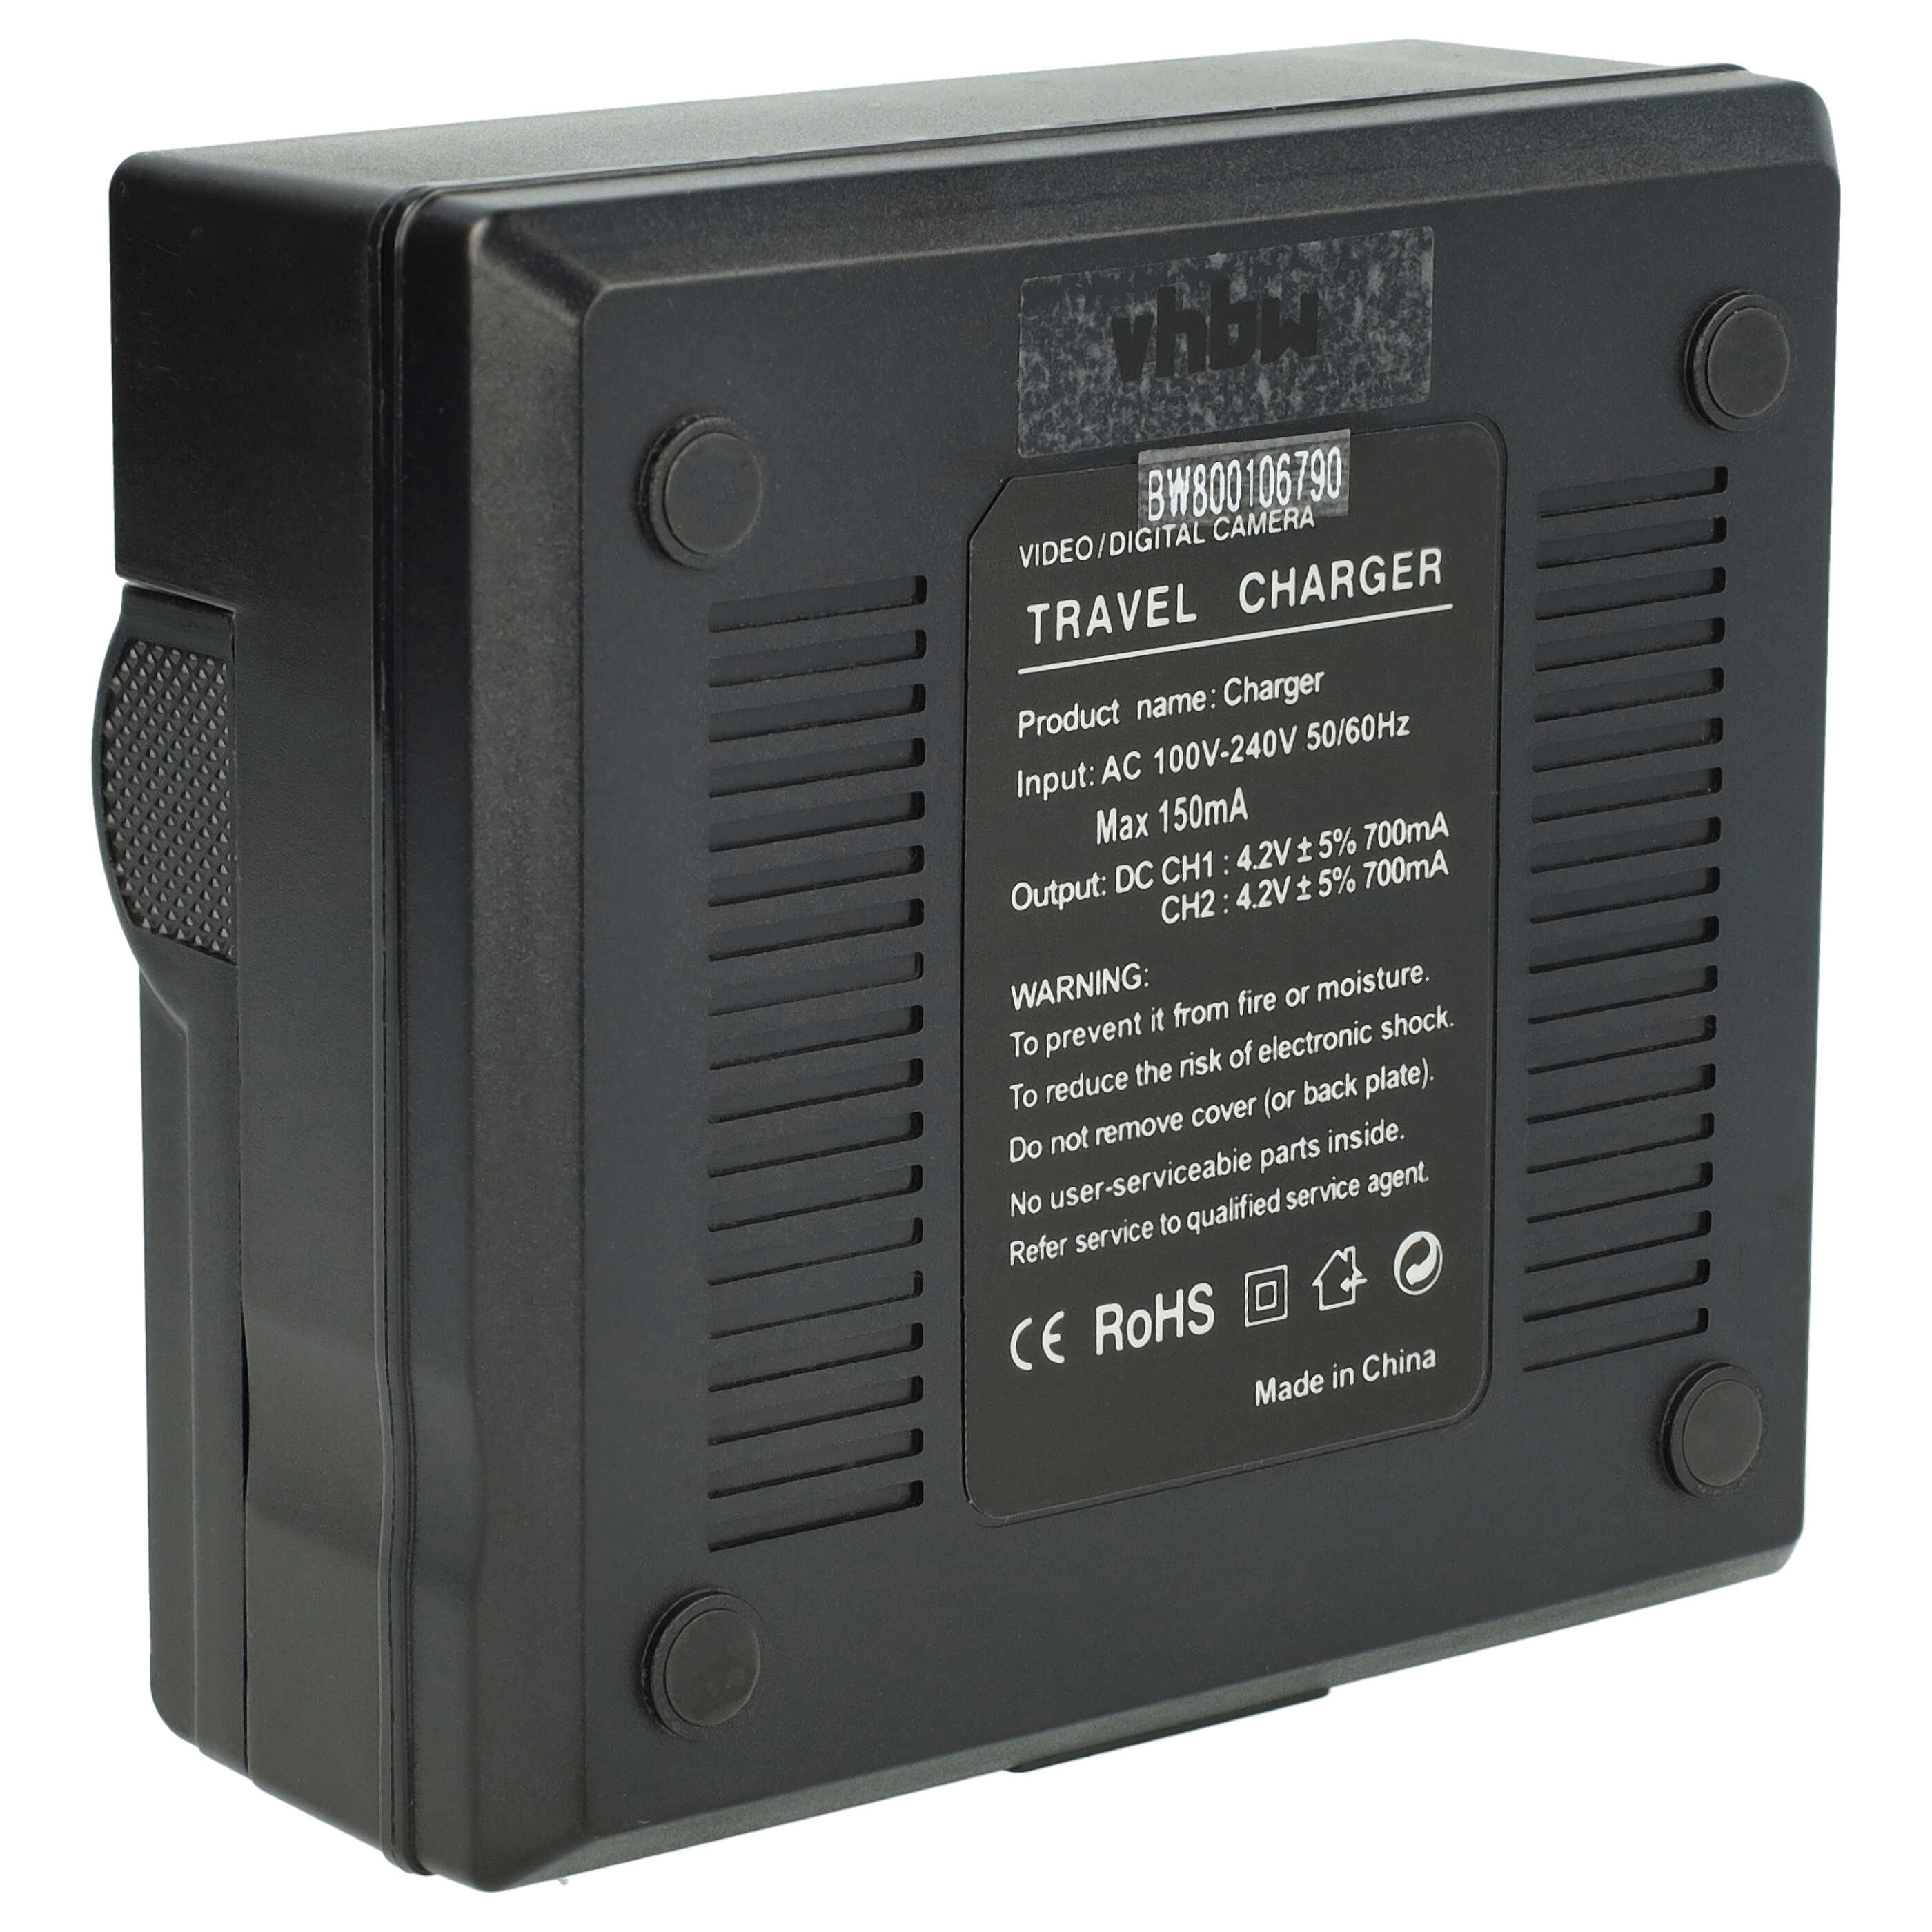 Battery Charger suitable for Fujifilm Digital Camera - 0.5 / 0.9 A, 4.2/8.4 V